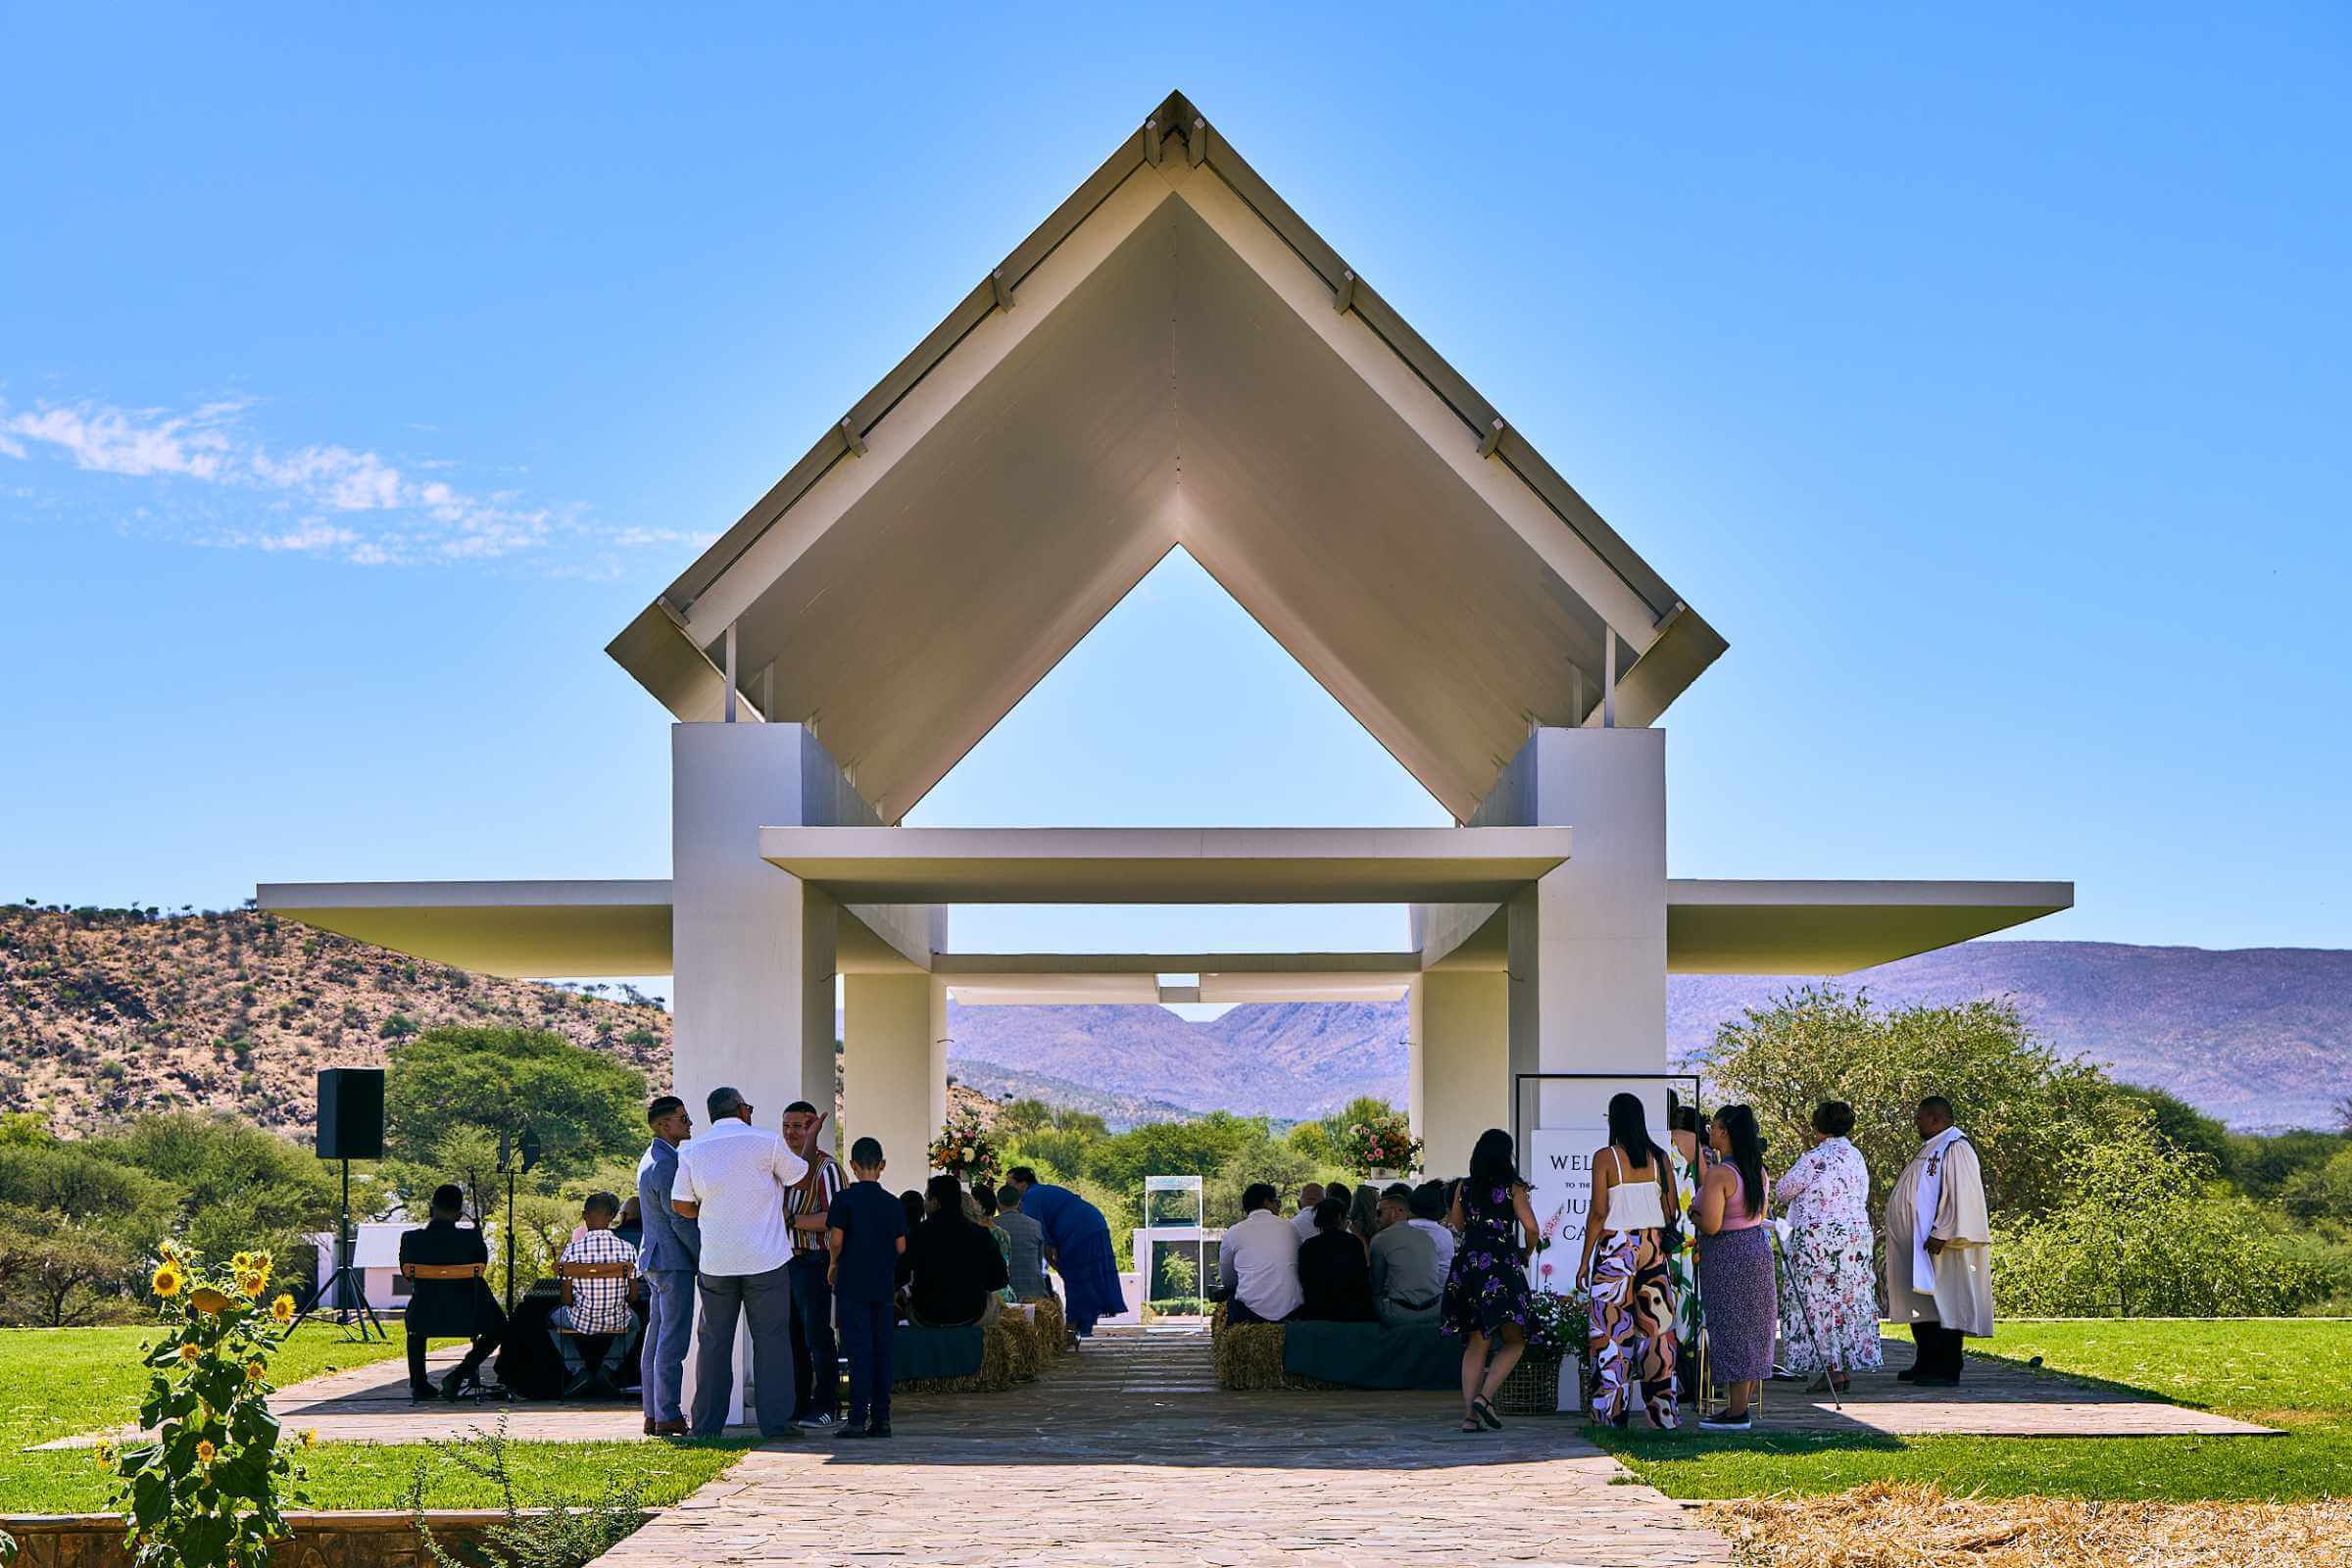 Guest in the open-air chapel at Sandwerf that overlooks the Joseph's Dream Stud paddocks and stable and, in the distance, the surrounding mountains.